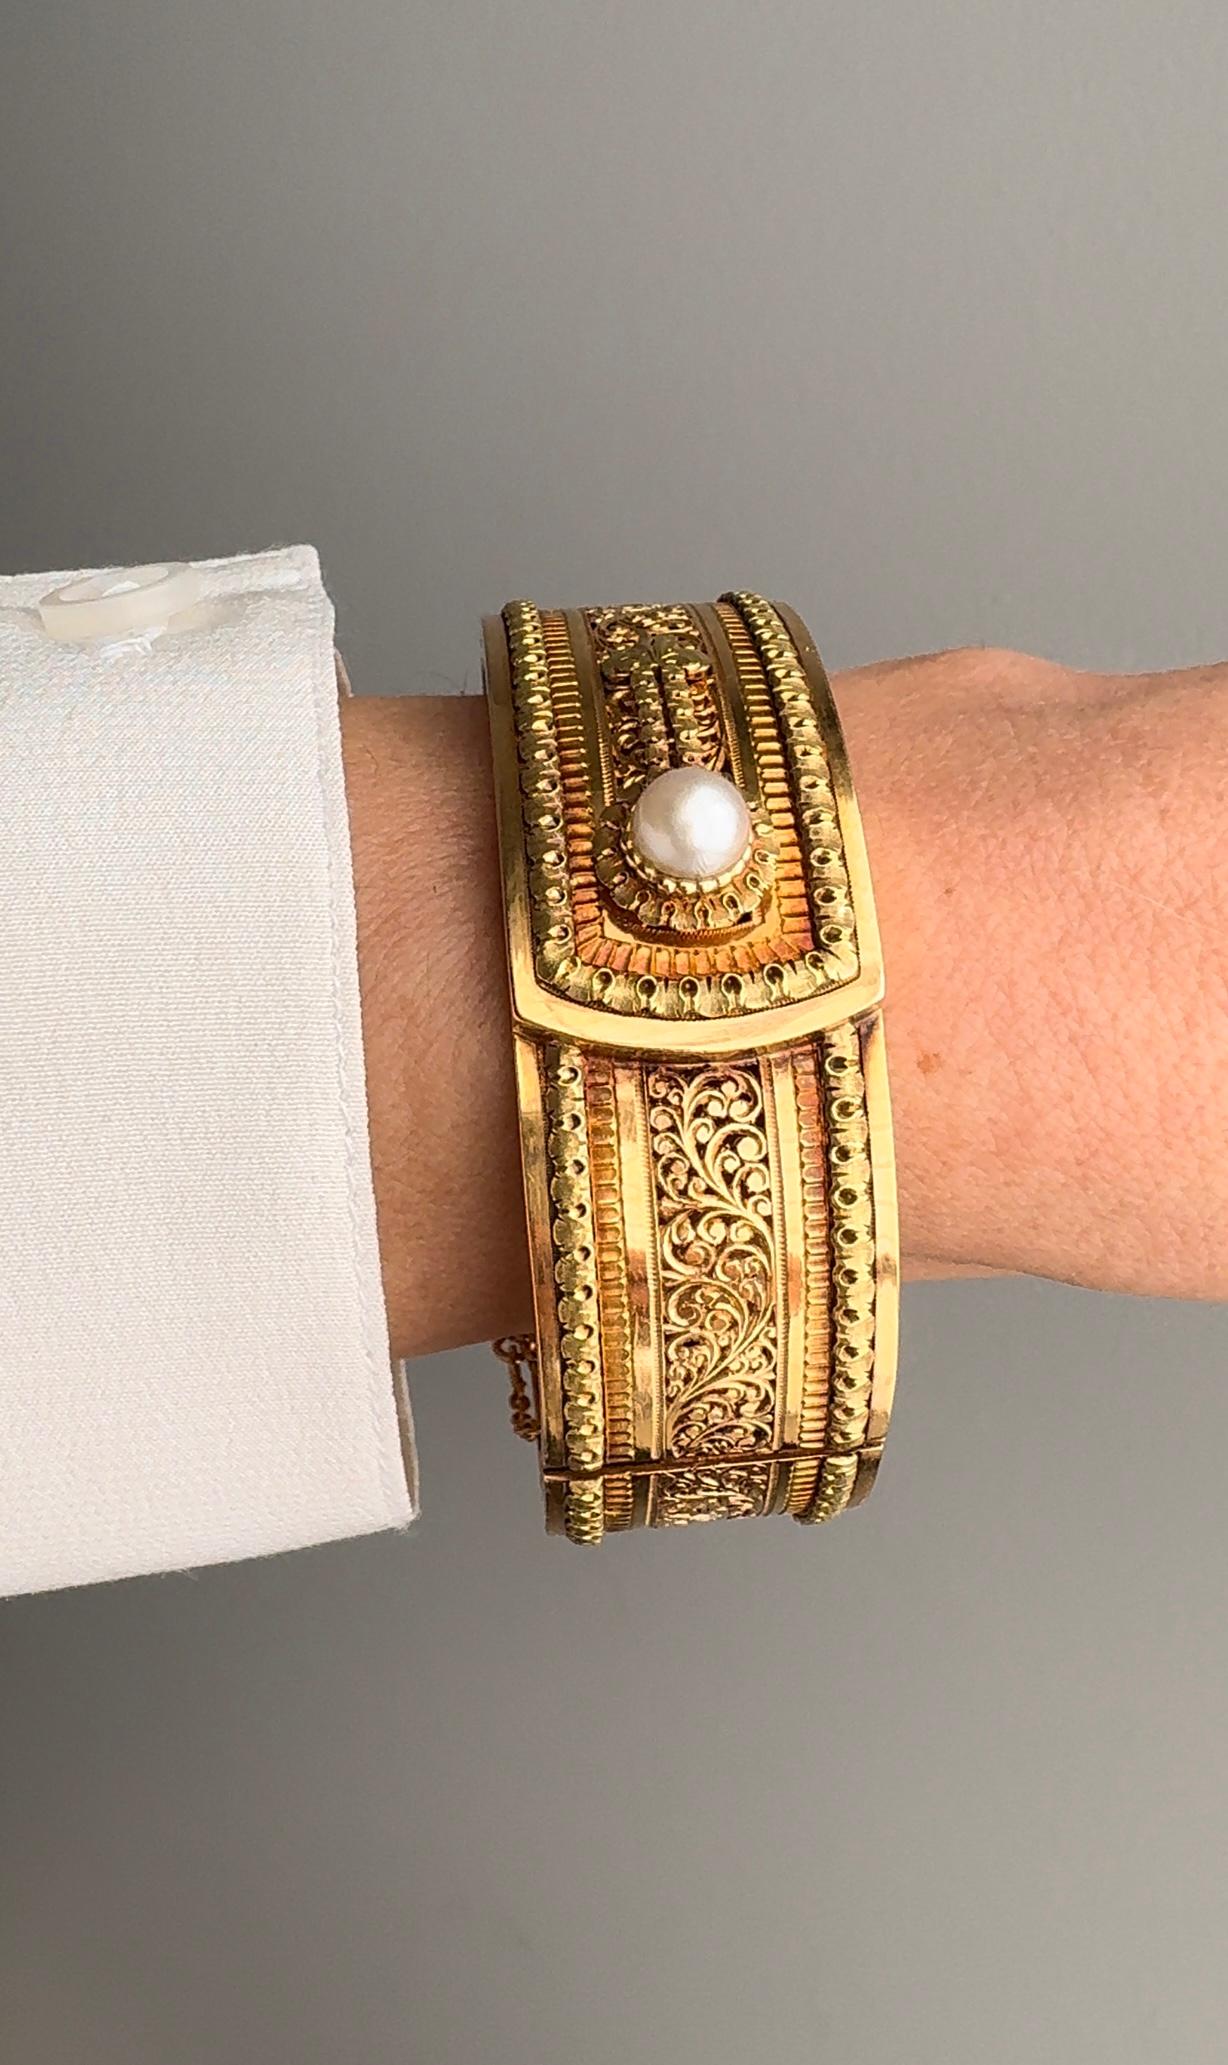 A fanciful lace and natural pearl button cuff bangle by Auguste Lahaye (workshop later purchased by the esteemed French jeweler Rene Boivin). Masterfully hand fabricated in contrasting rose and yellow 18k gold with a delightful patina. The entire